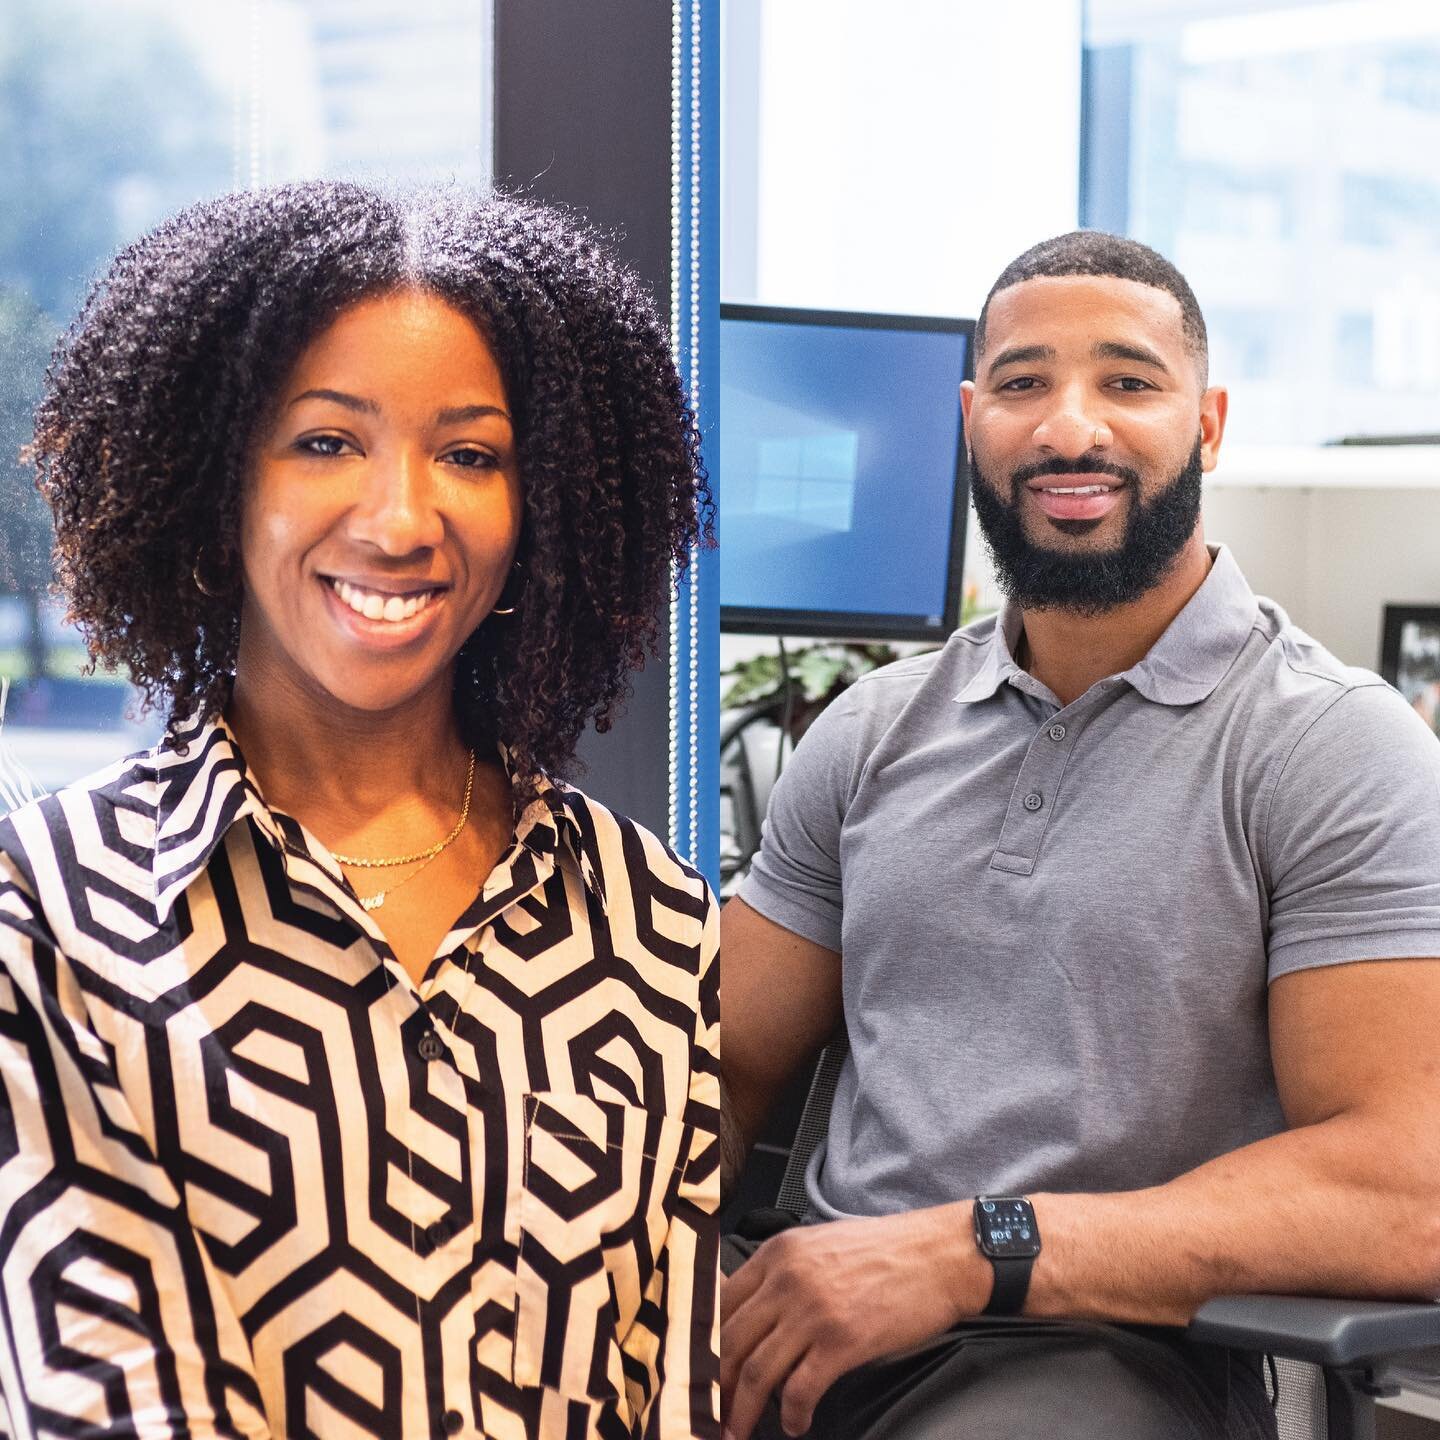 It&rsquo;s a family thing! We are elated to have the brother and sister duo of Kevin and Maya Madison join the team at long last! Welcome! 

#architecture #familymatters #cleveland #aiacleveland #design